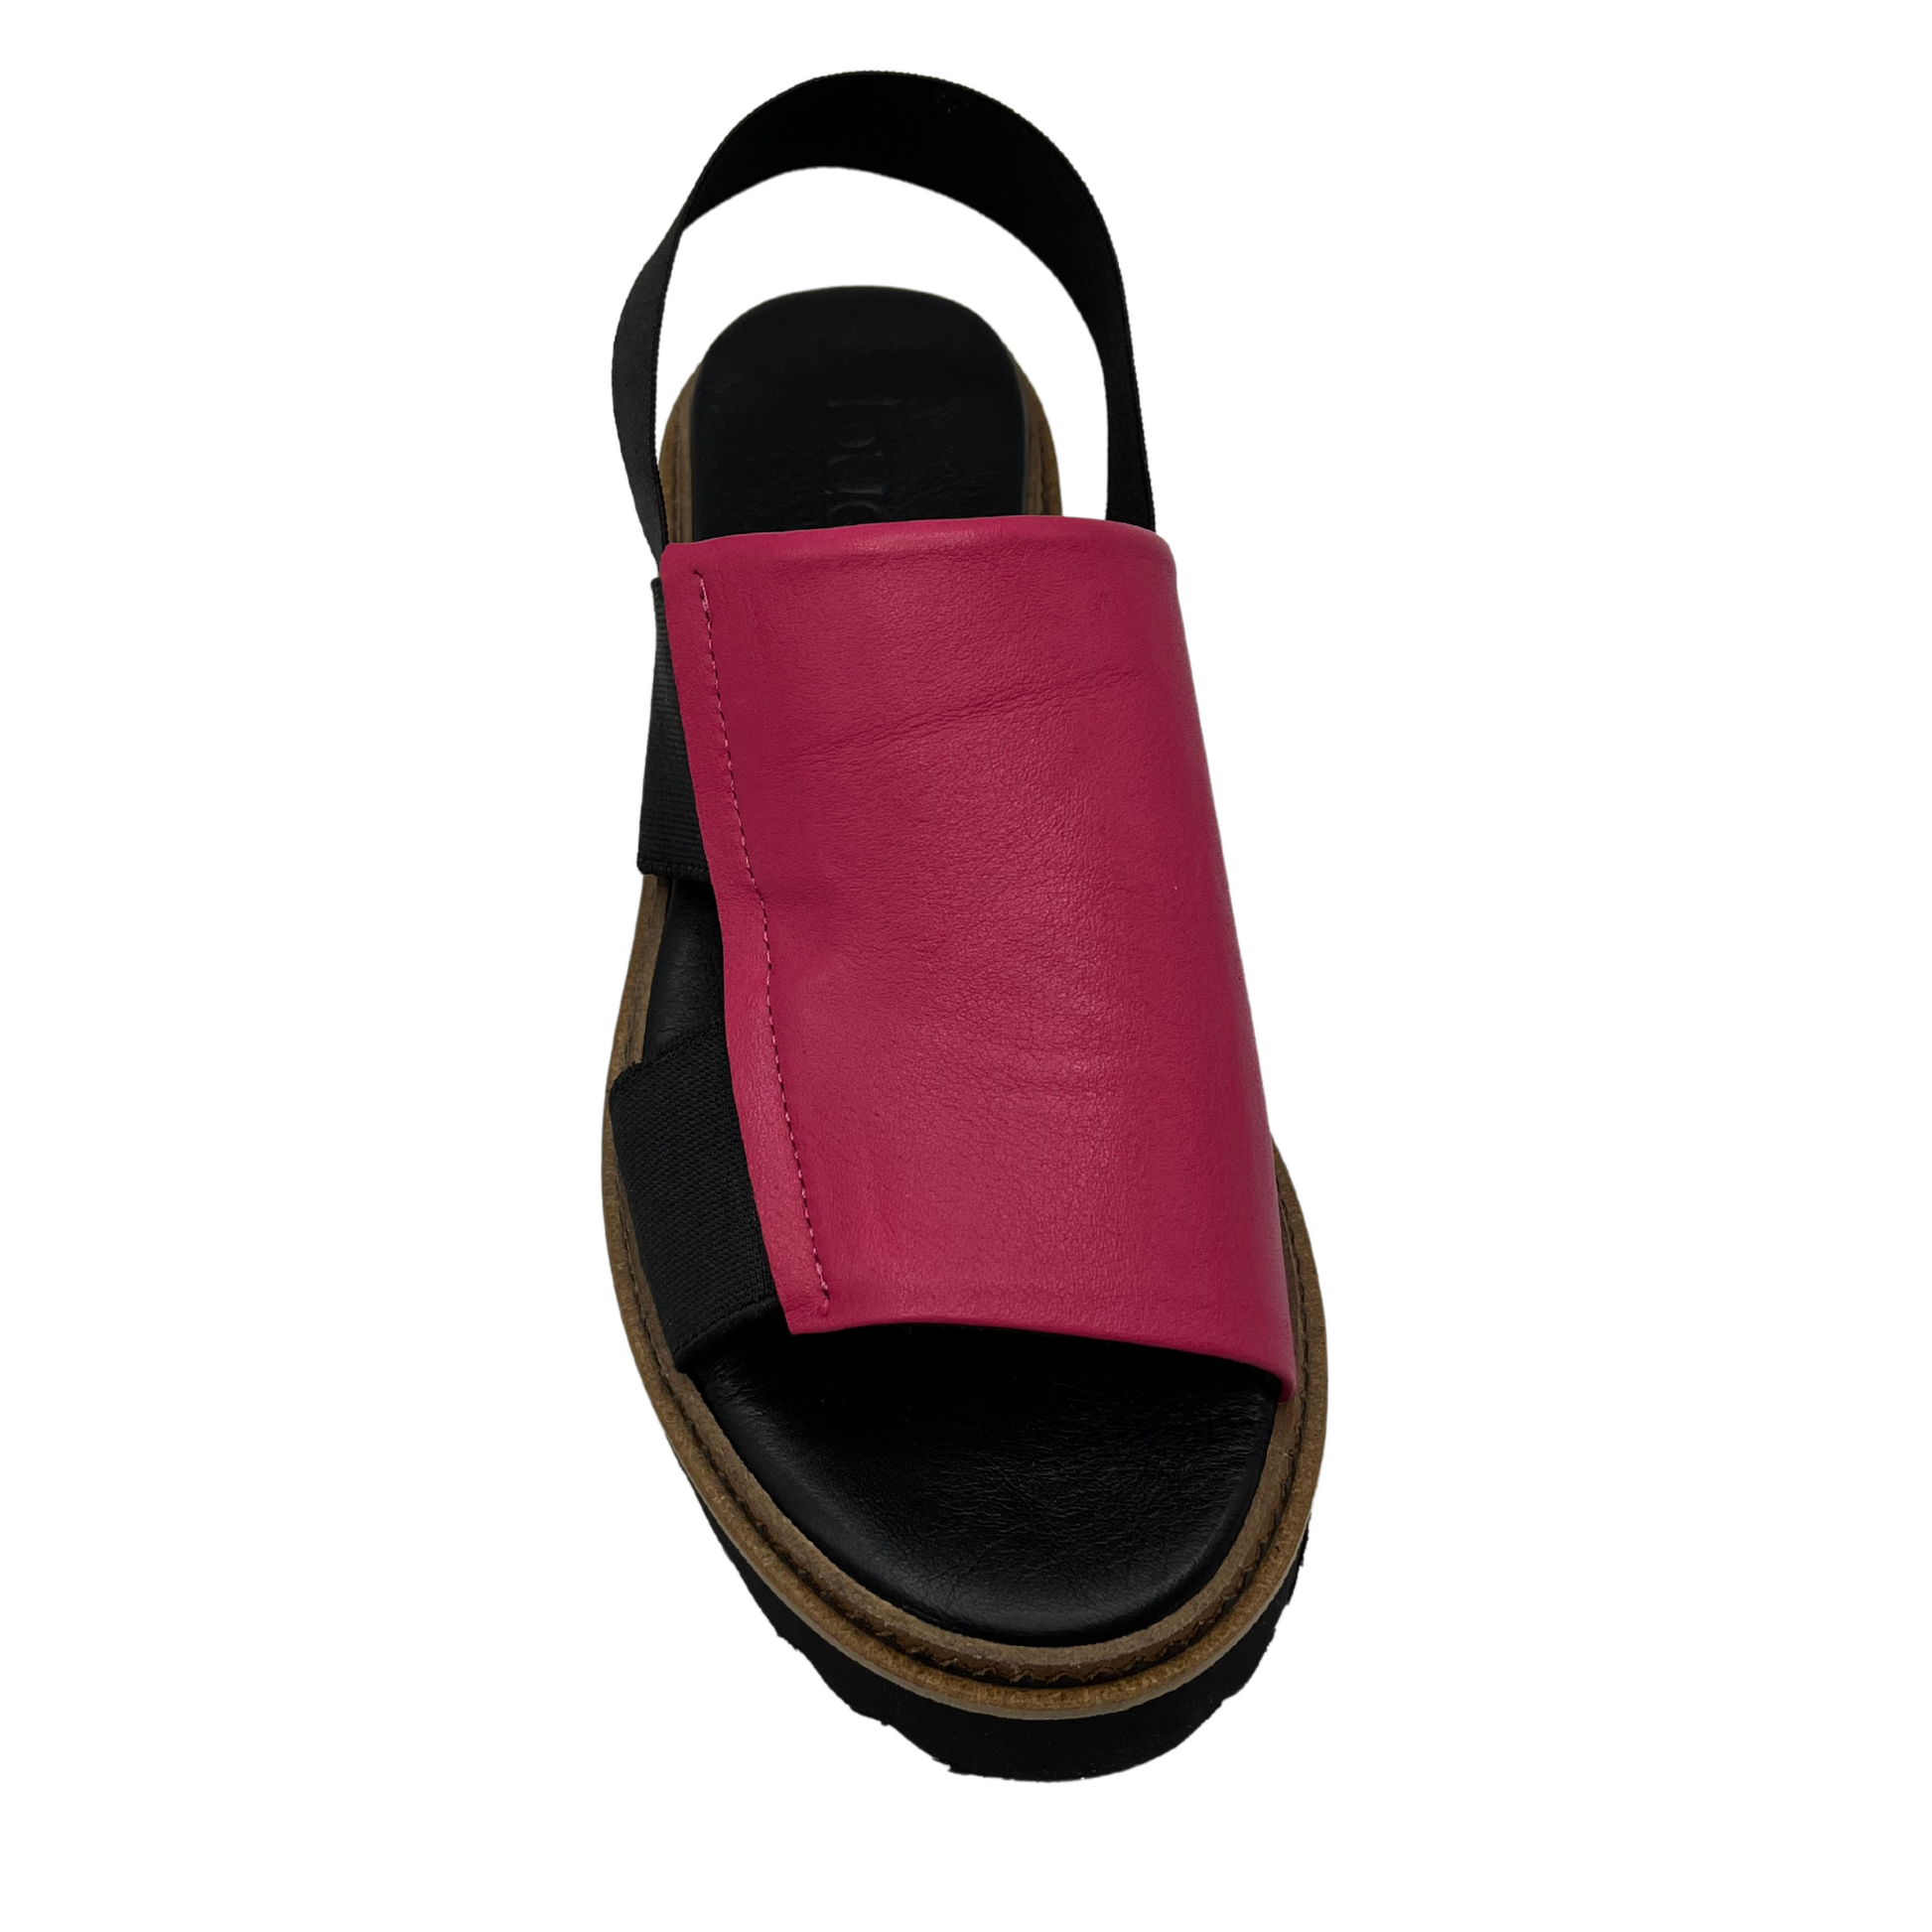 Top view of hot pink sandal with black elastic straps and rounded toe